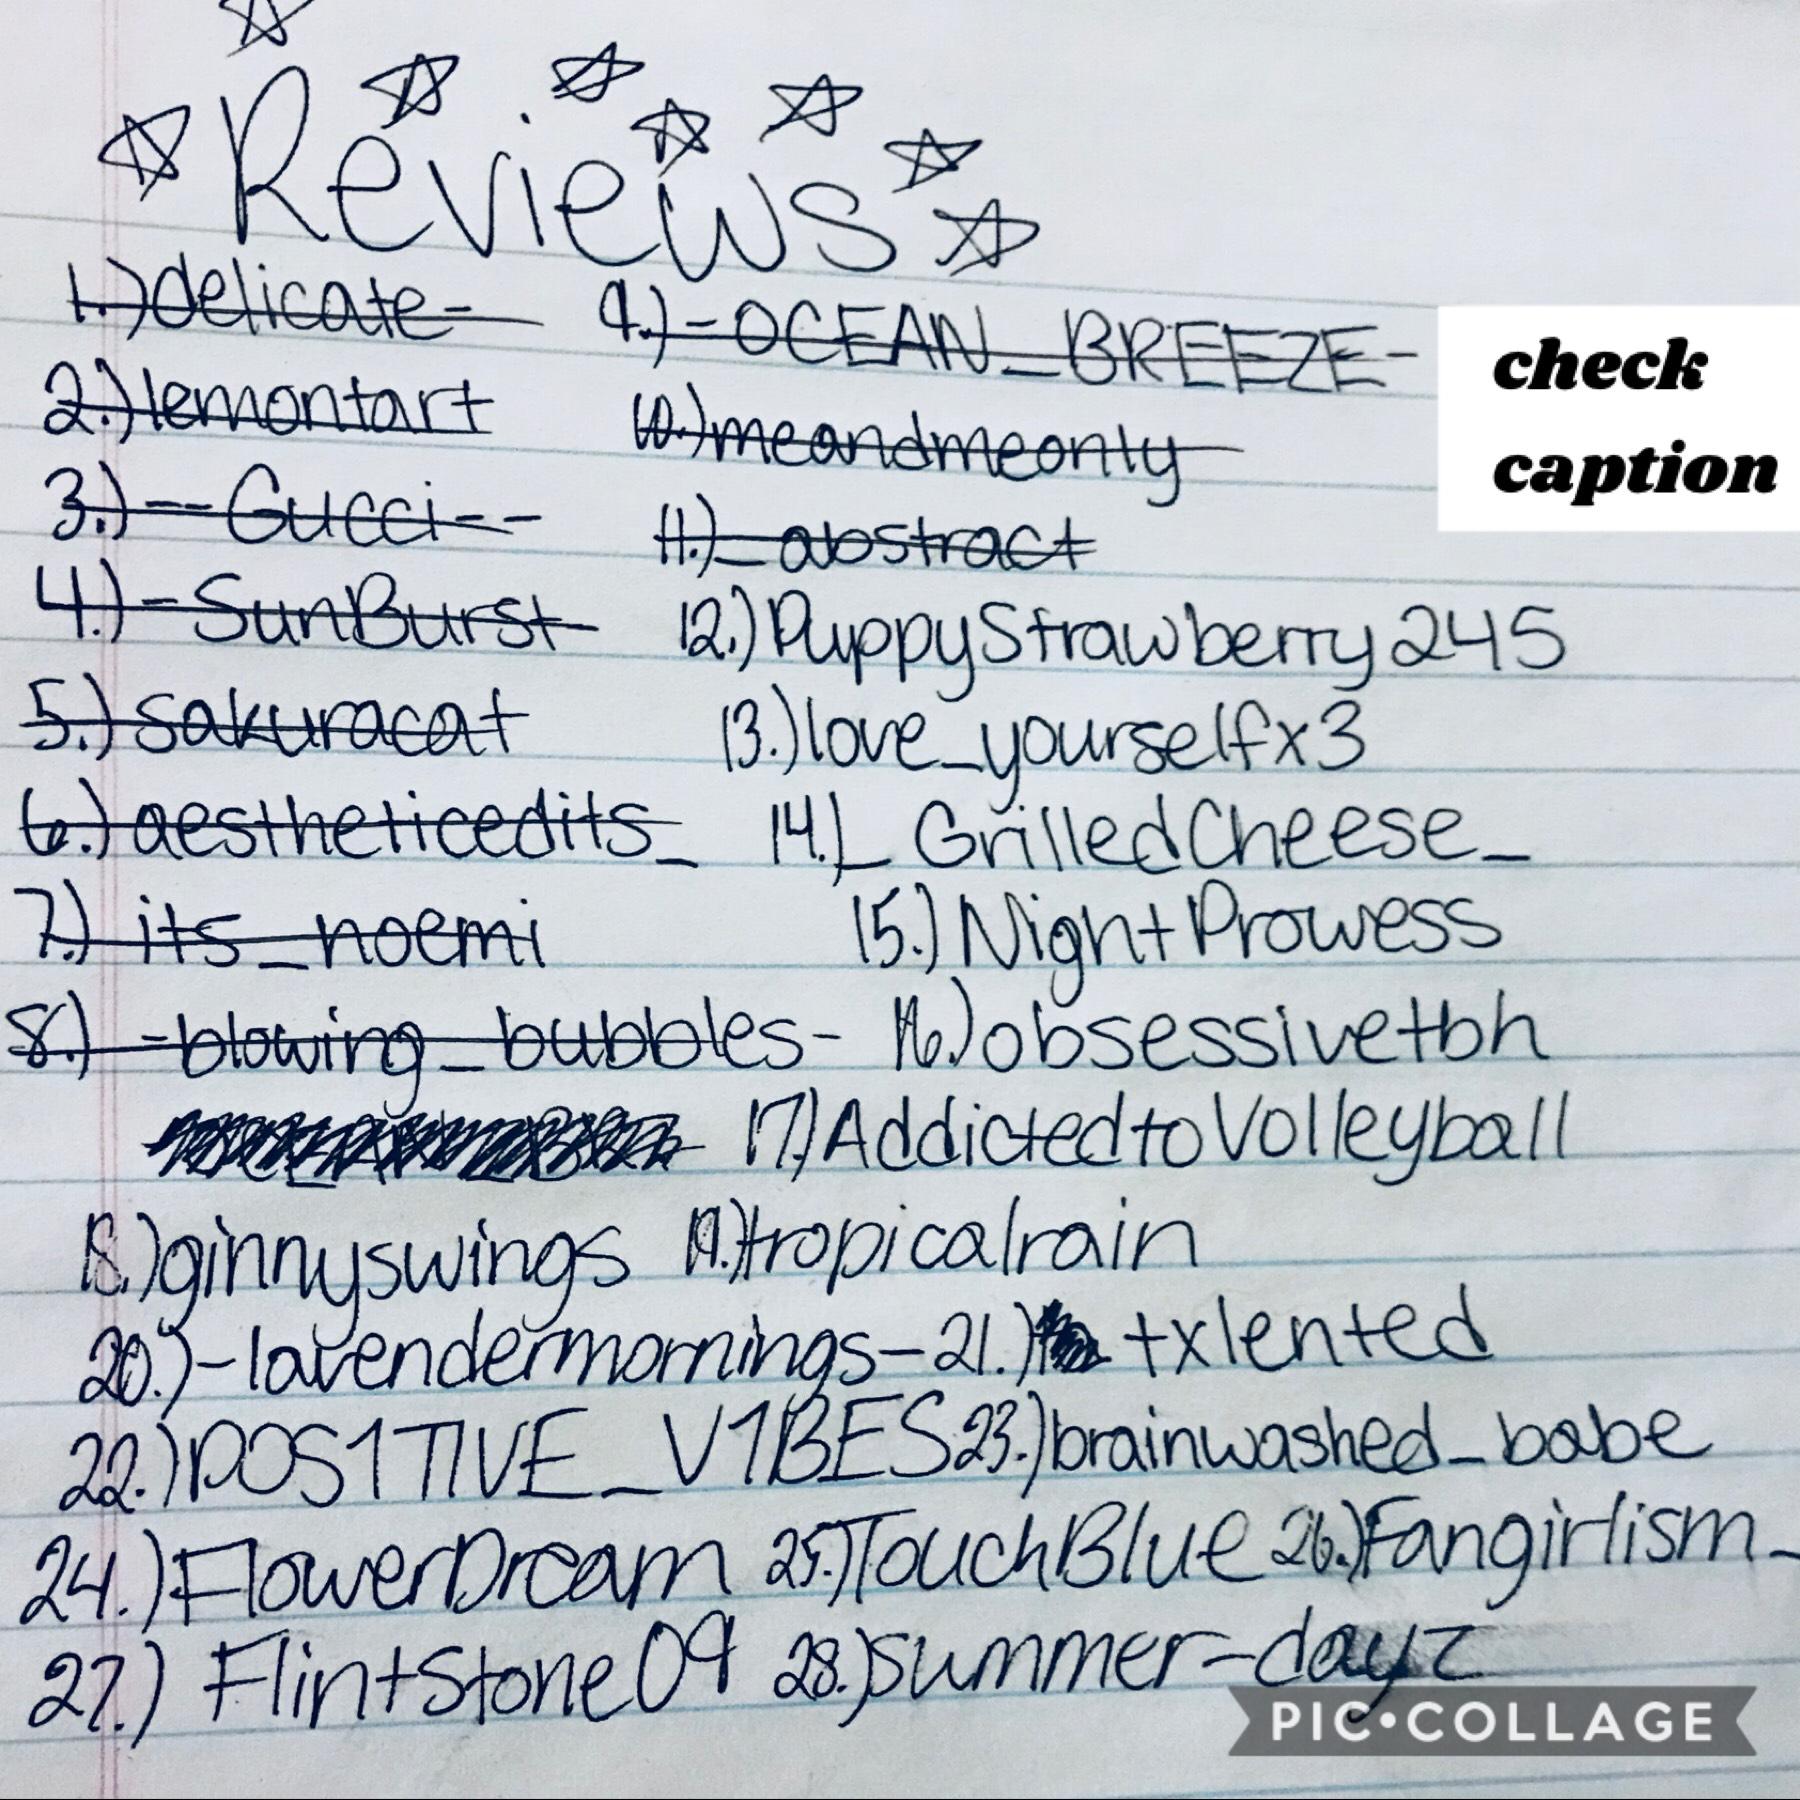 Tap!
Sorry for the awful handwriting and 
mistakes etc, I just wanted you guys to 
know that I haven’t forgotten about 
you and your review is coming. I’m going 
in numerical order ❤️